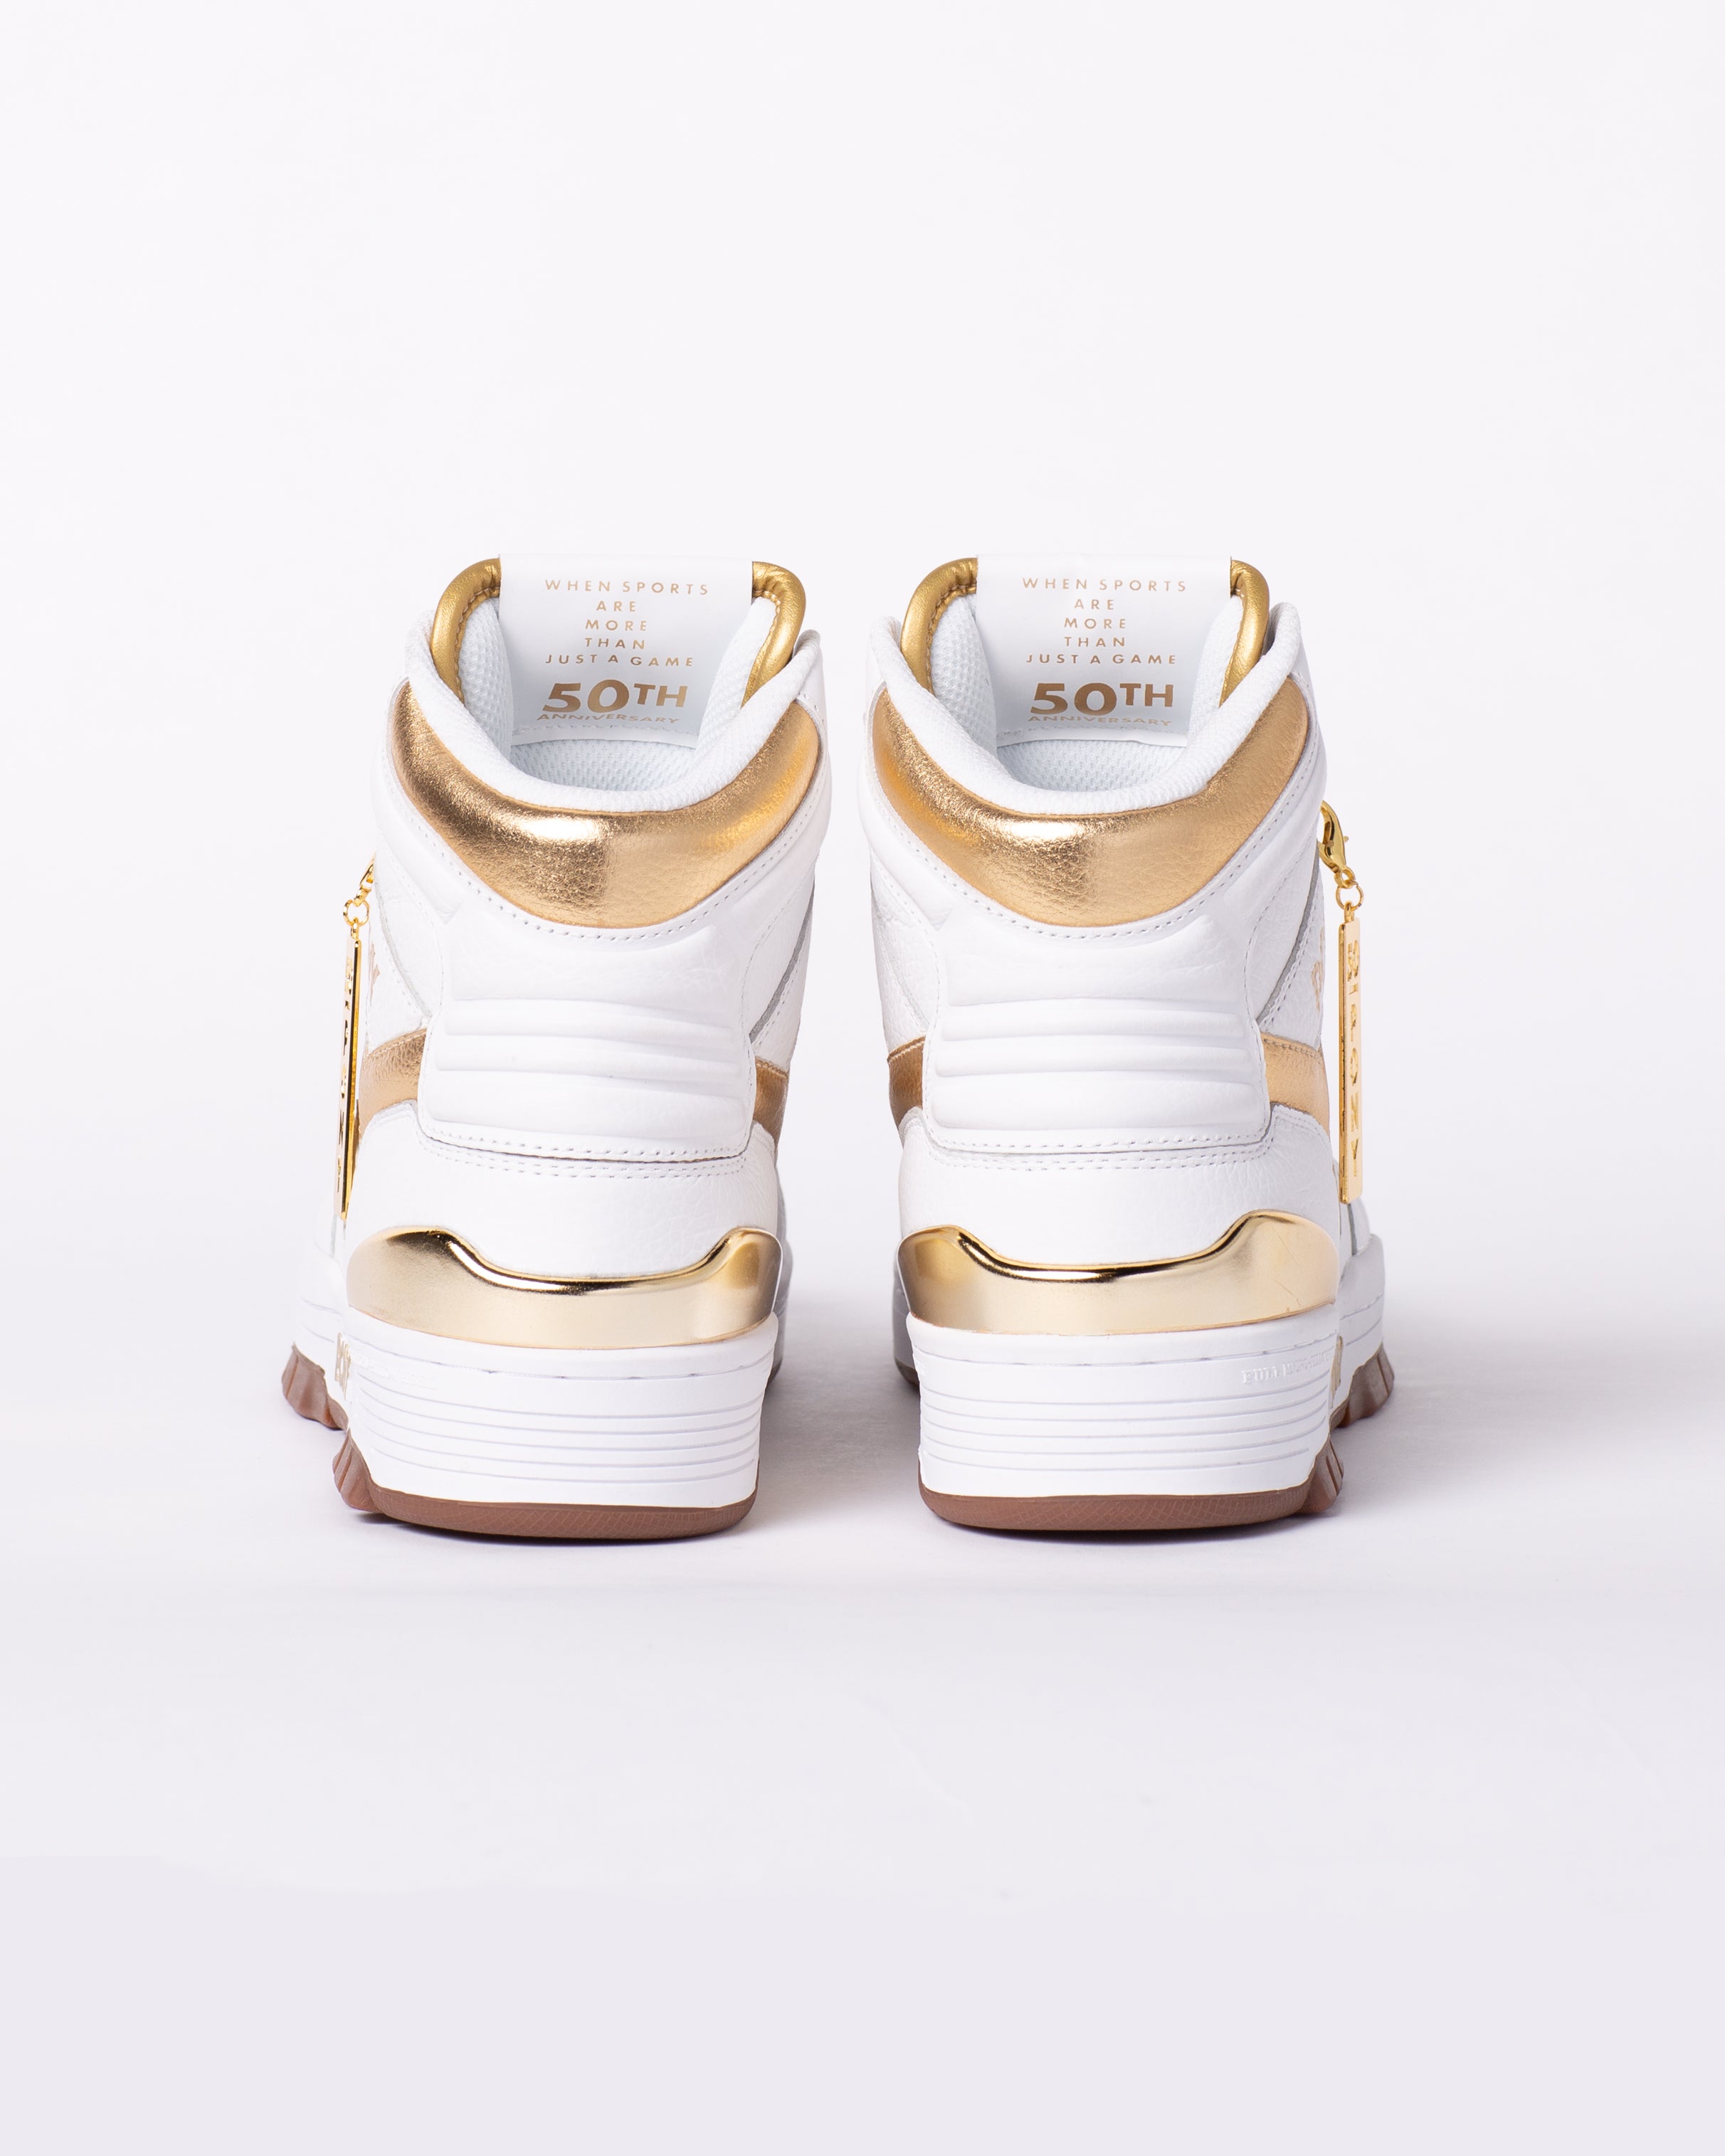 PONY M100 gold and white high top with inside tongue showing "When SPORTS ARE MORE THAN JUST A GAME" 50th anniversary on the inside